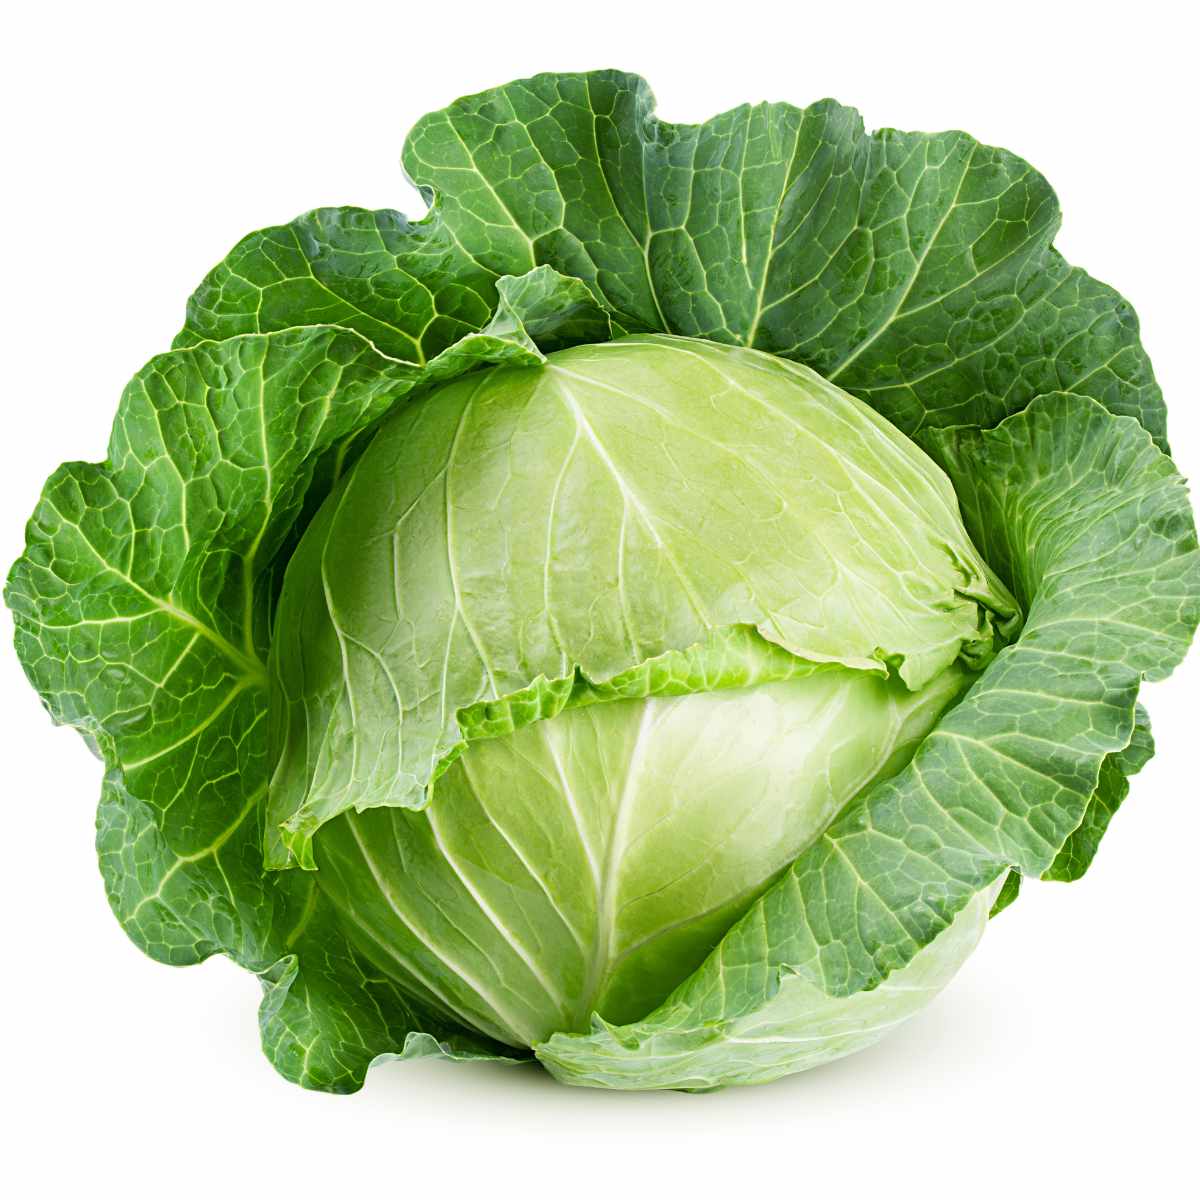 Late flat cabbage on a white background.